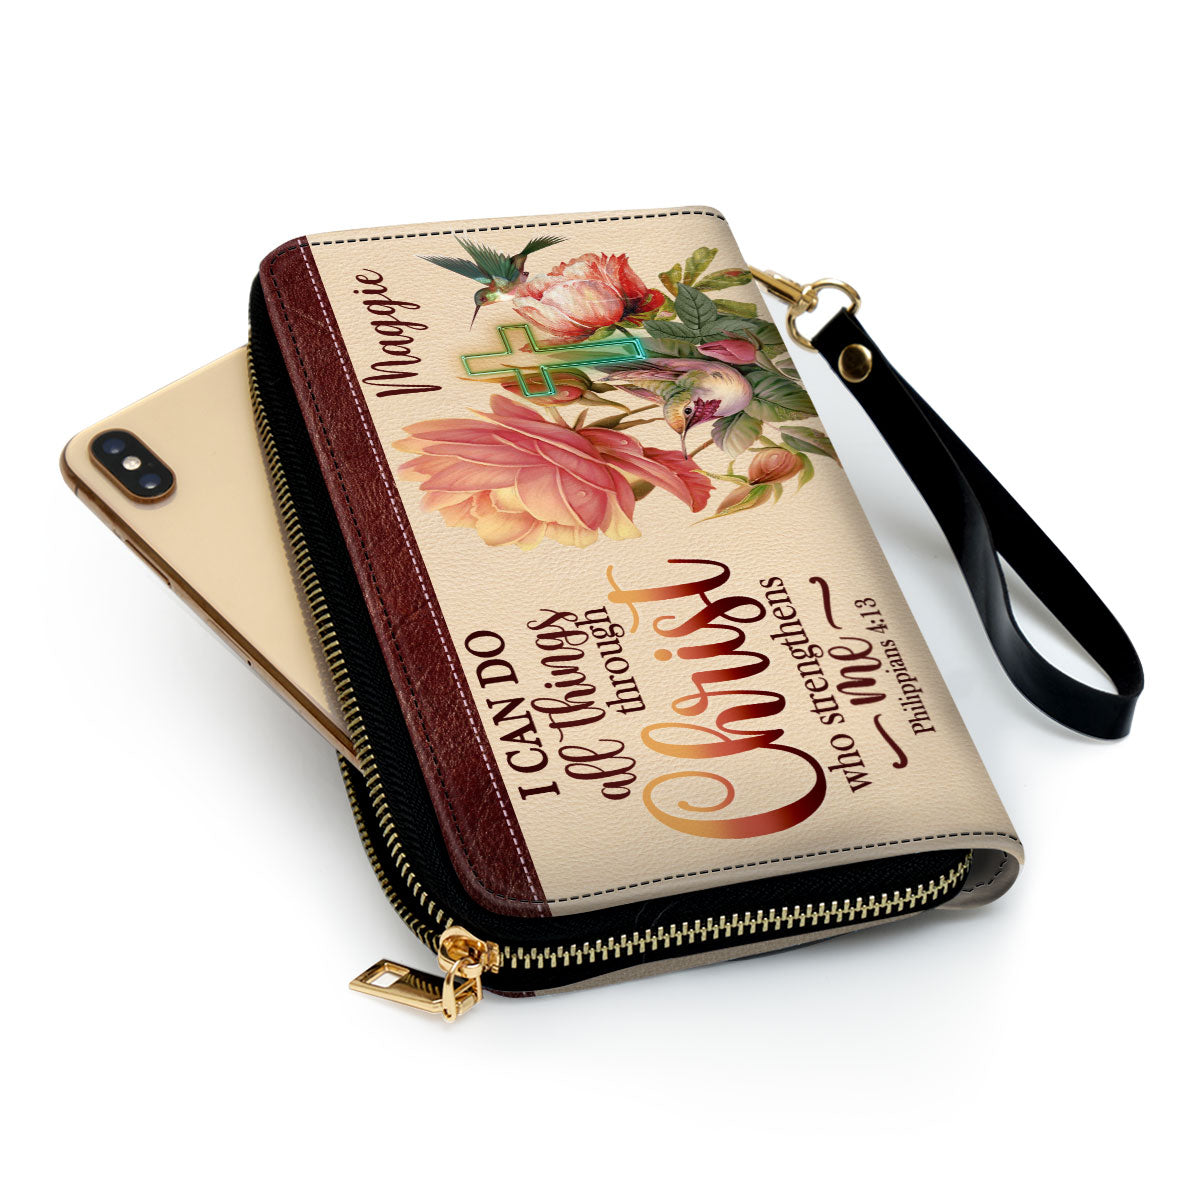 Jesuspirit | Personalized Leather Clutch Purse With Wristlet Strap Handle | Spiritual Gifts For Christian Women | I Can Do All Things Through Christ | Philippians 4:13 CPMM681